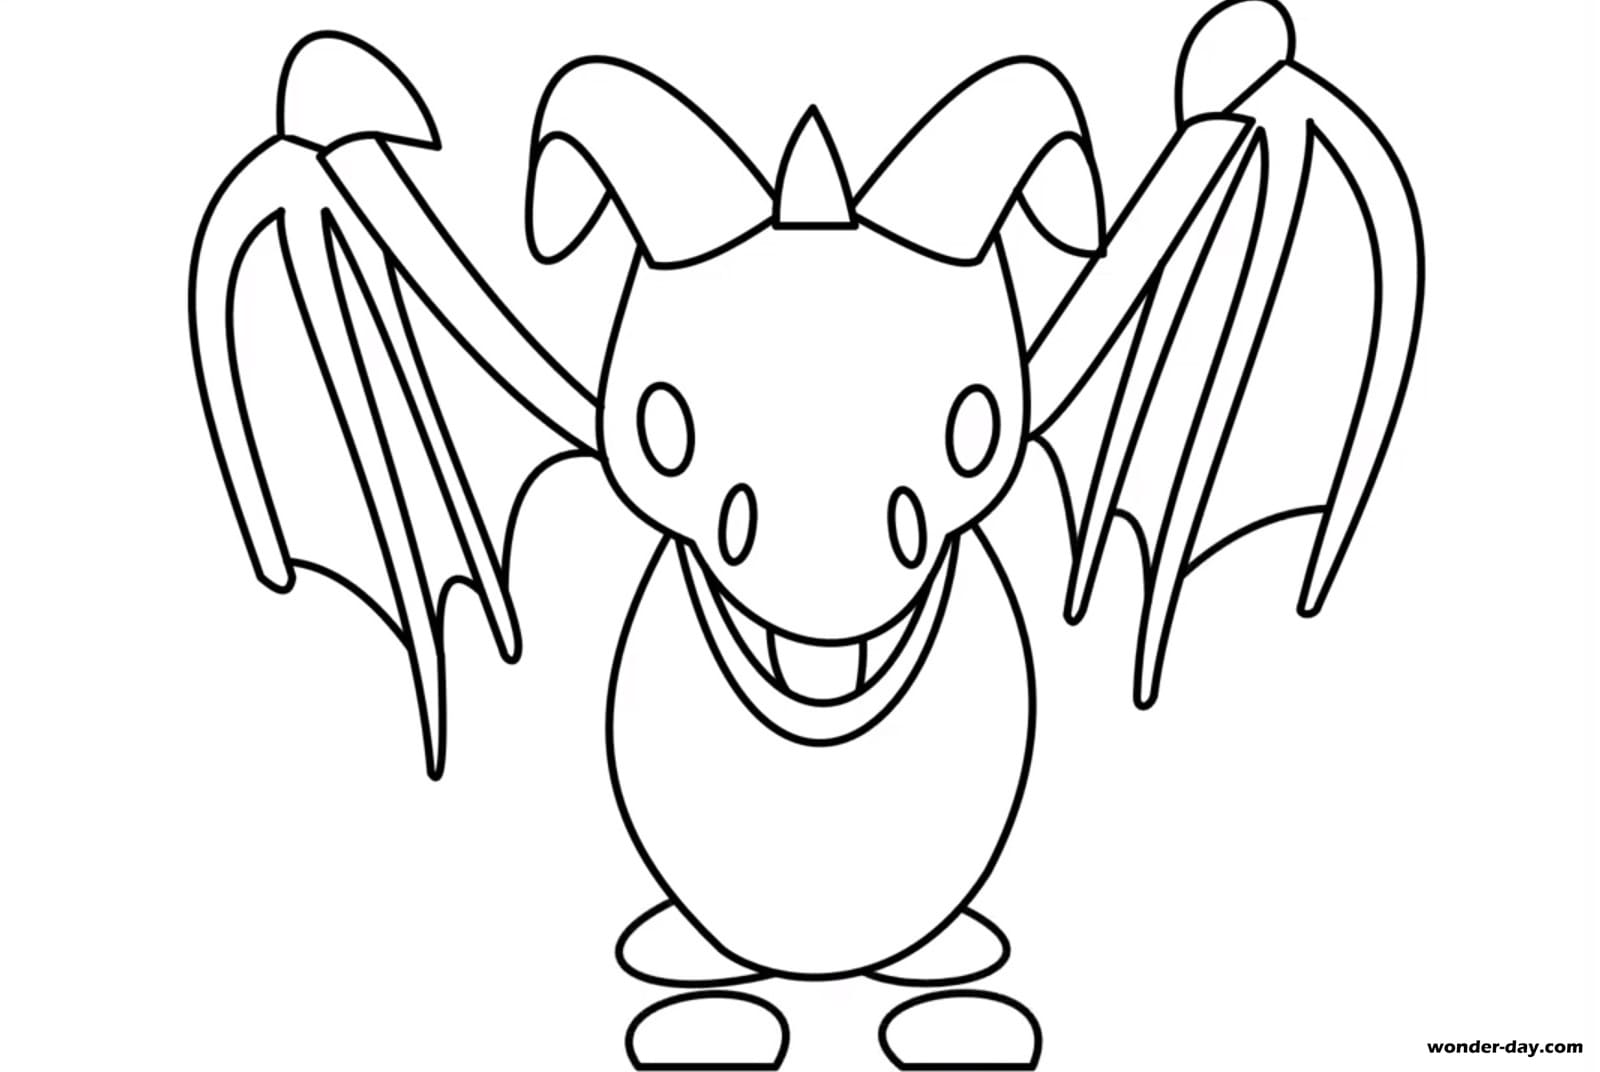 Coloring Pages Adopt Me Print For Free Wonder Day Com - frost dragon pets coloring roblox adopt me coloring pages